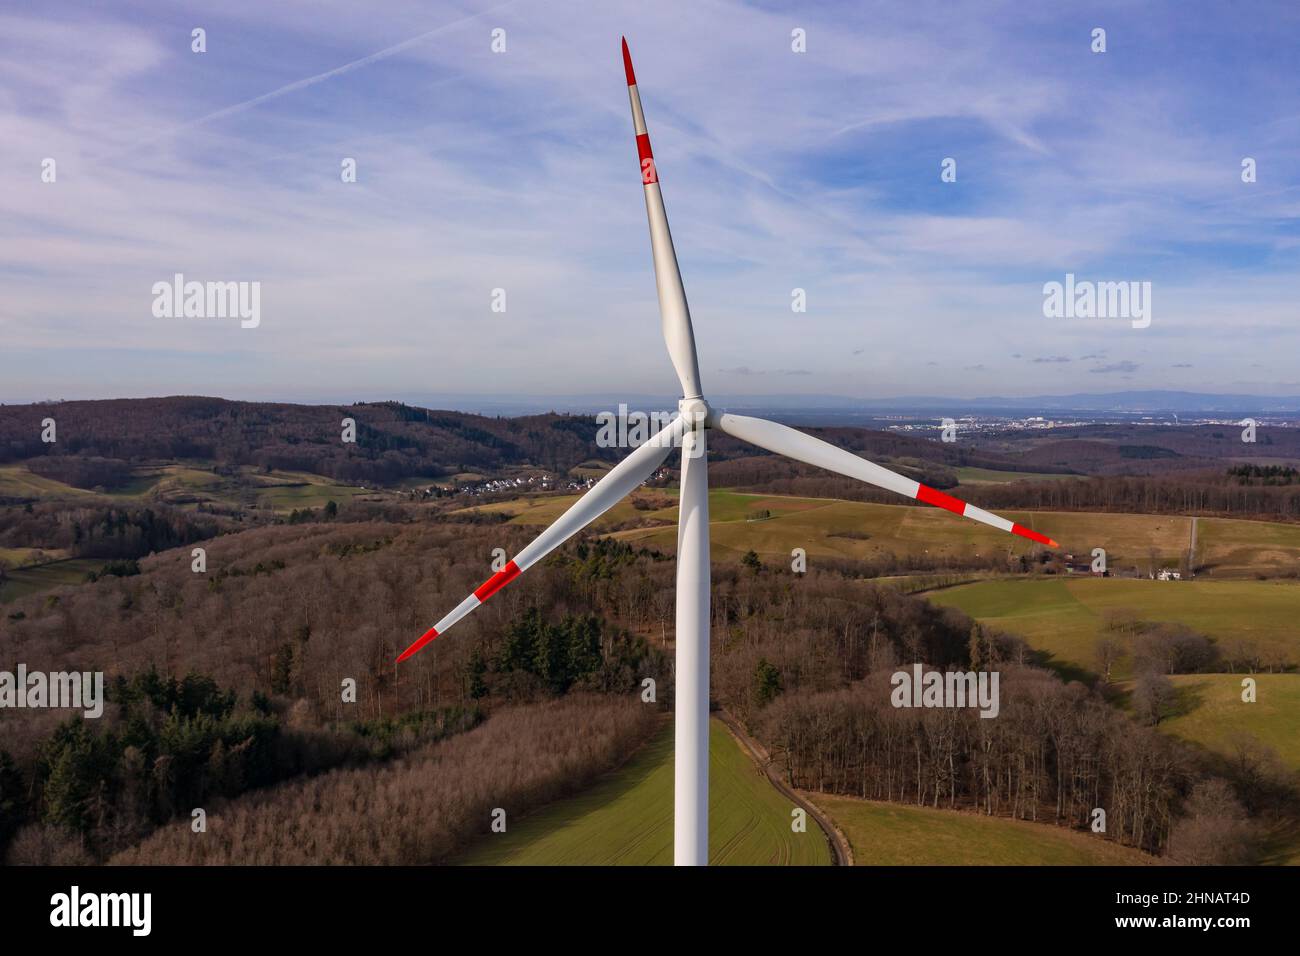 Aerial view of a wind turbine with the three rotor blades with good visibility in the background Stock Photo